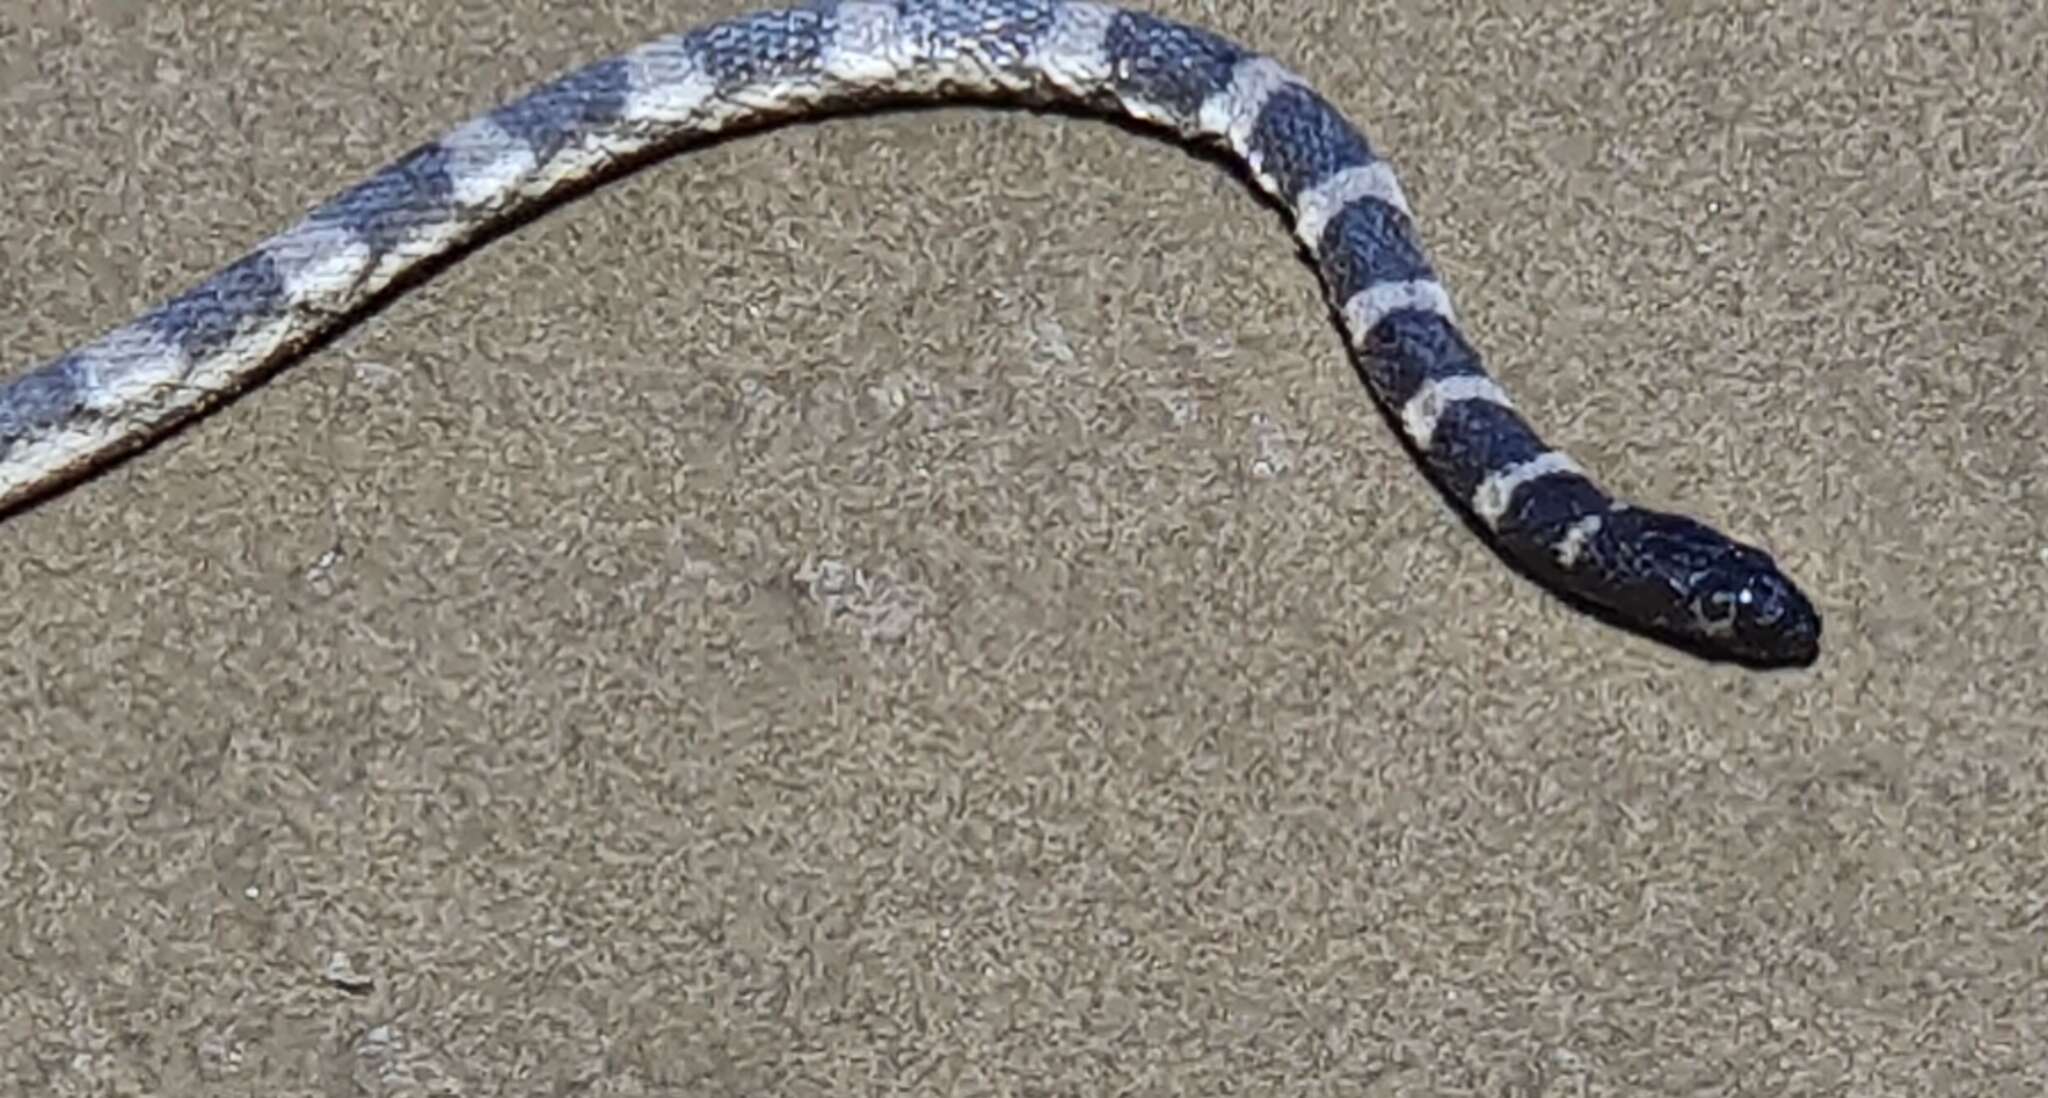 Image of Spectacled or King’s seasnake